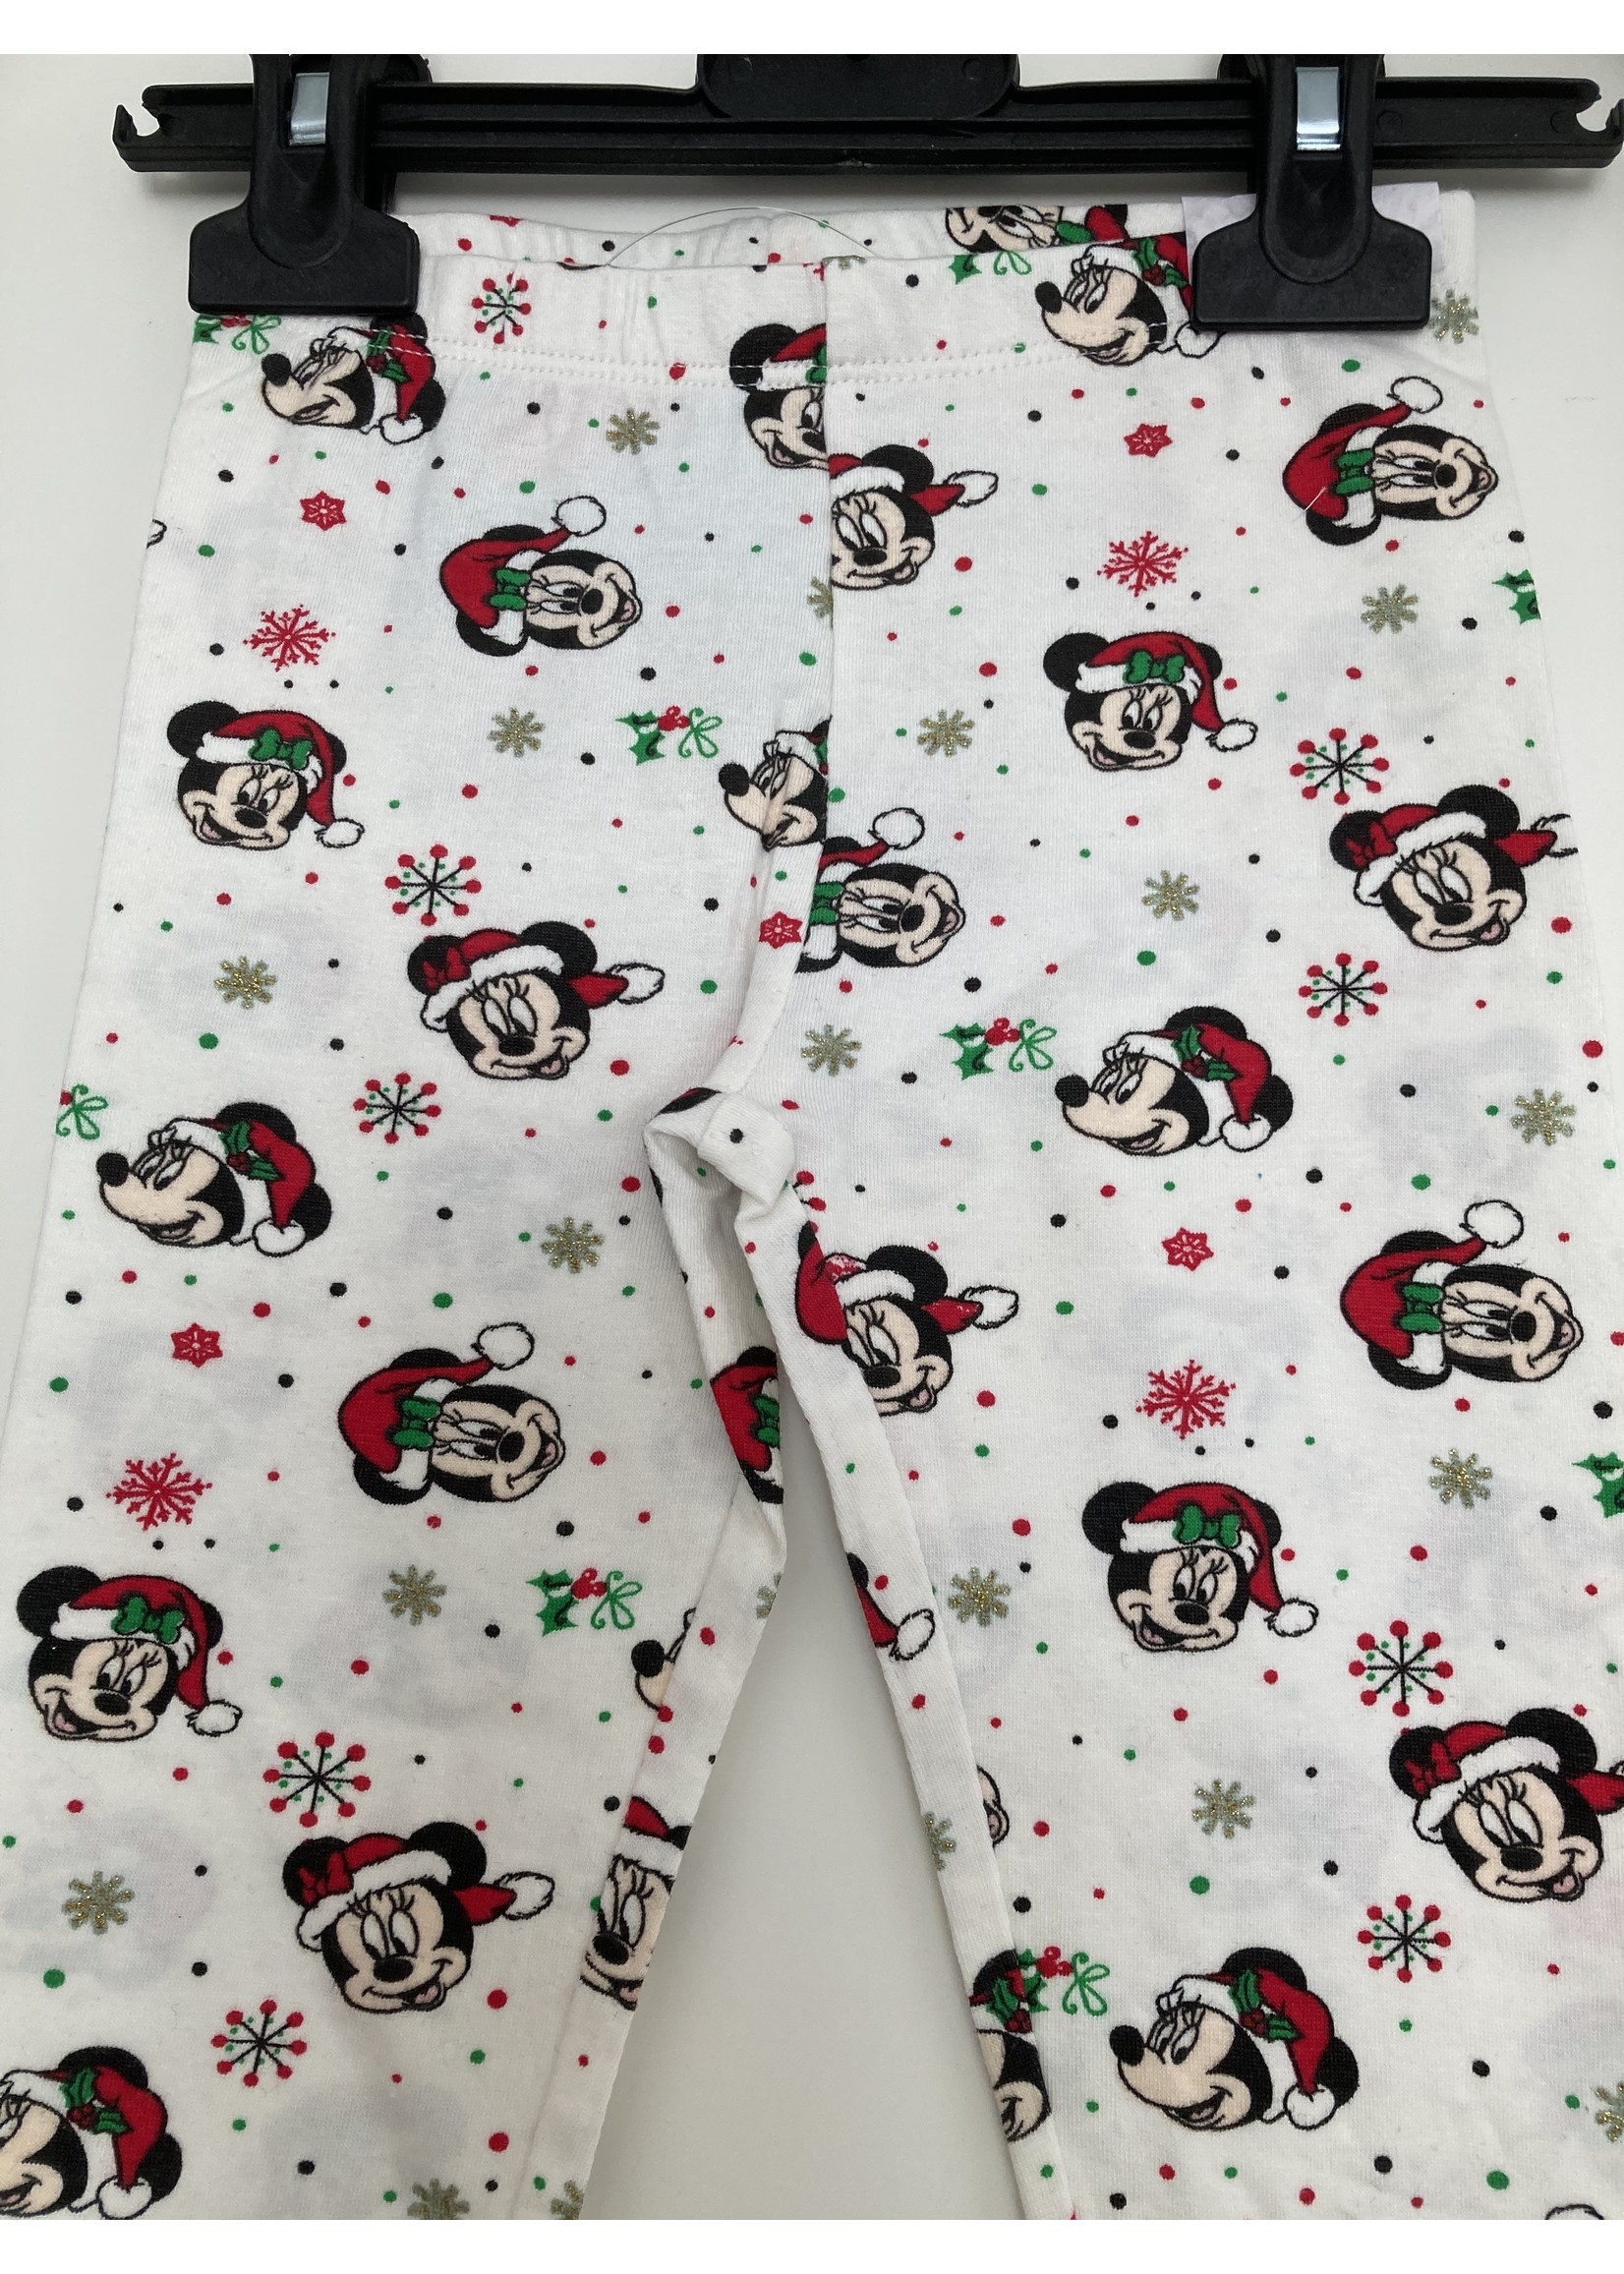 Disney baby Mickey & Minnie Mouse Christmas leggings from Disney baby white